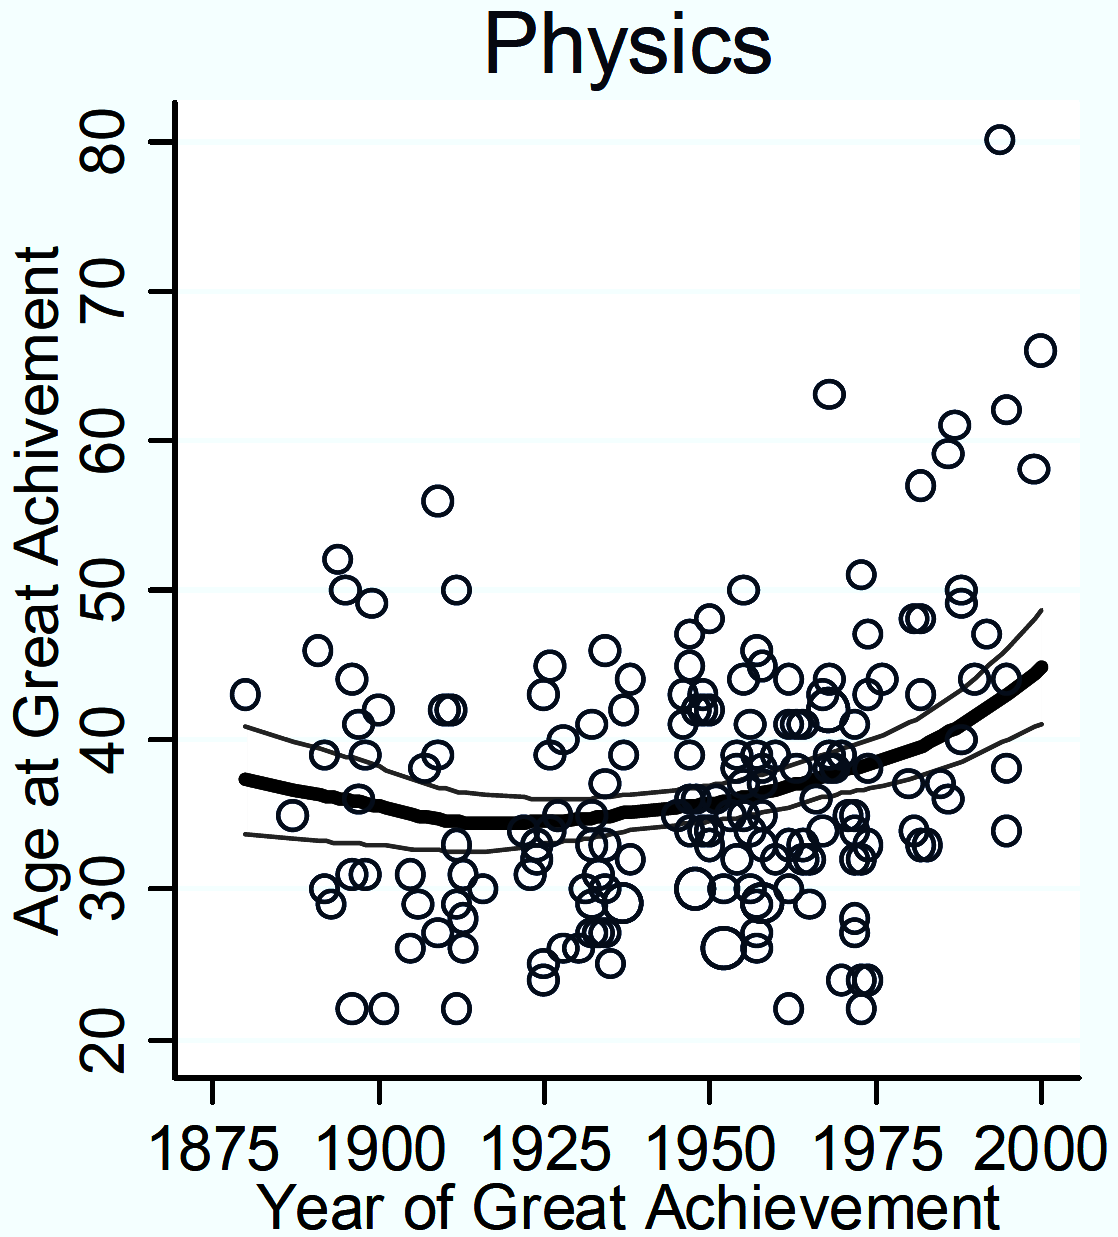 PNAS 2011 Age dynamics Supporting Figure 1B. Physics_.png